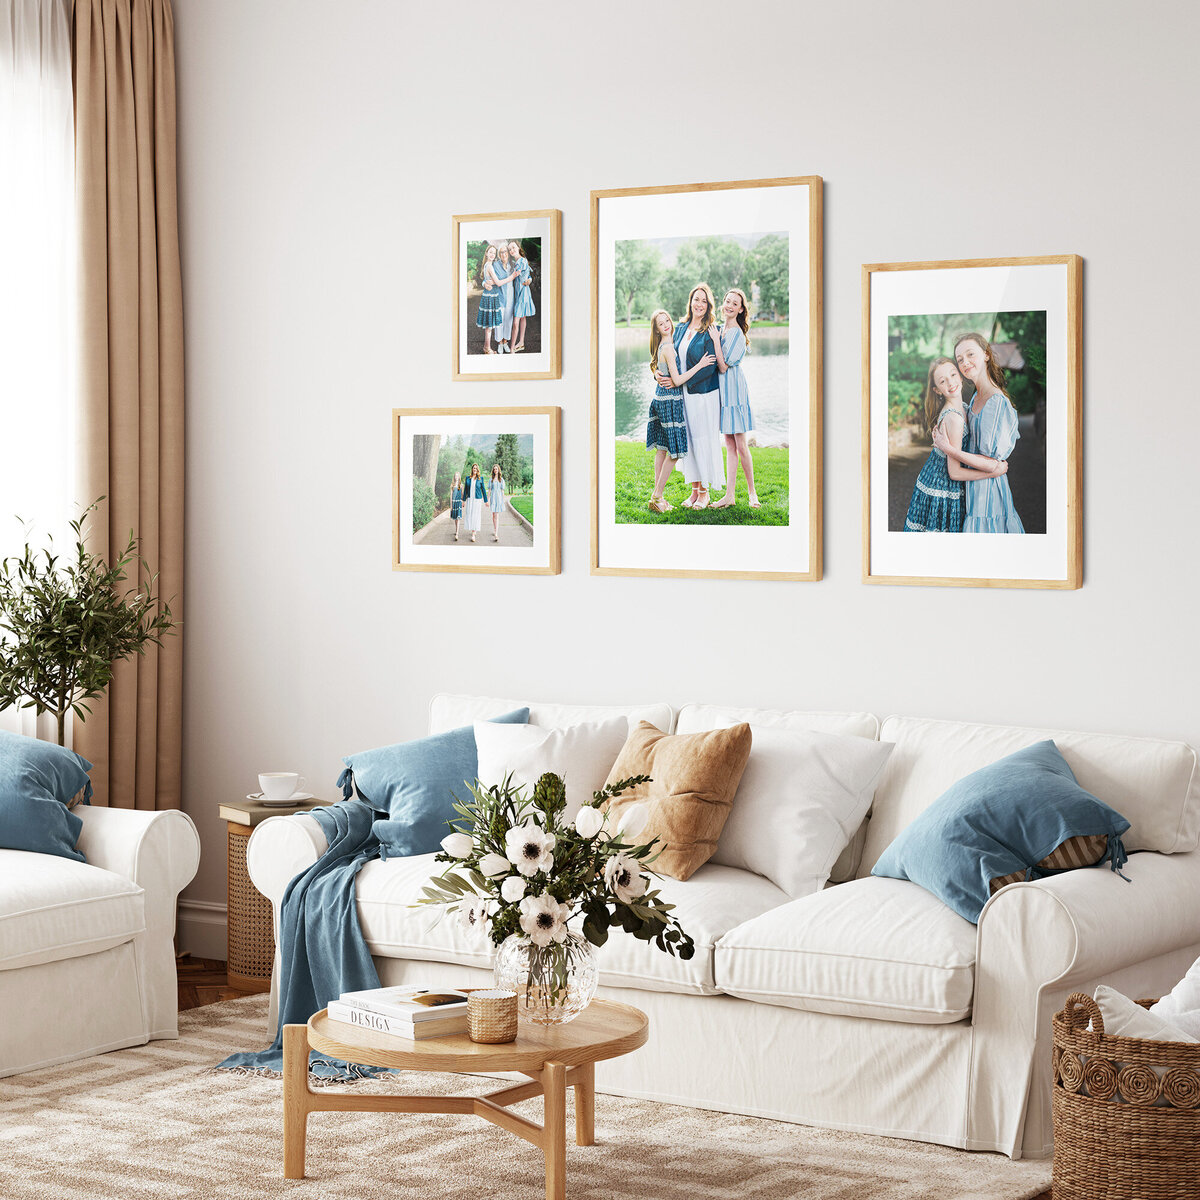 Above a white couch, within a stylish home, 4 family pictures hang on the wall